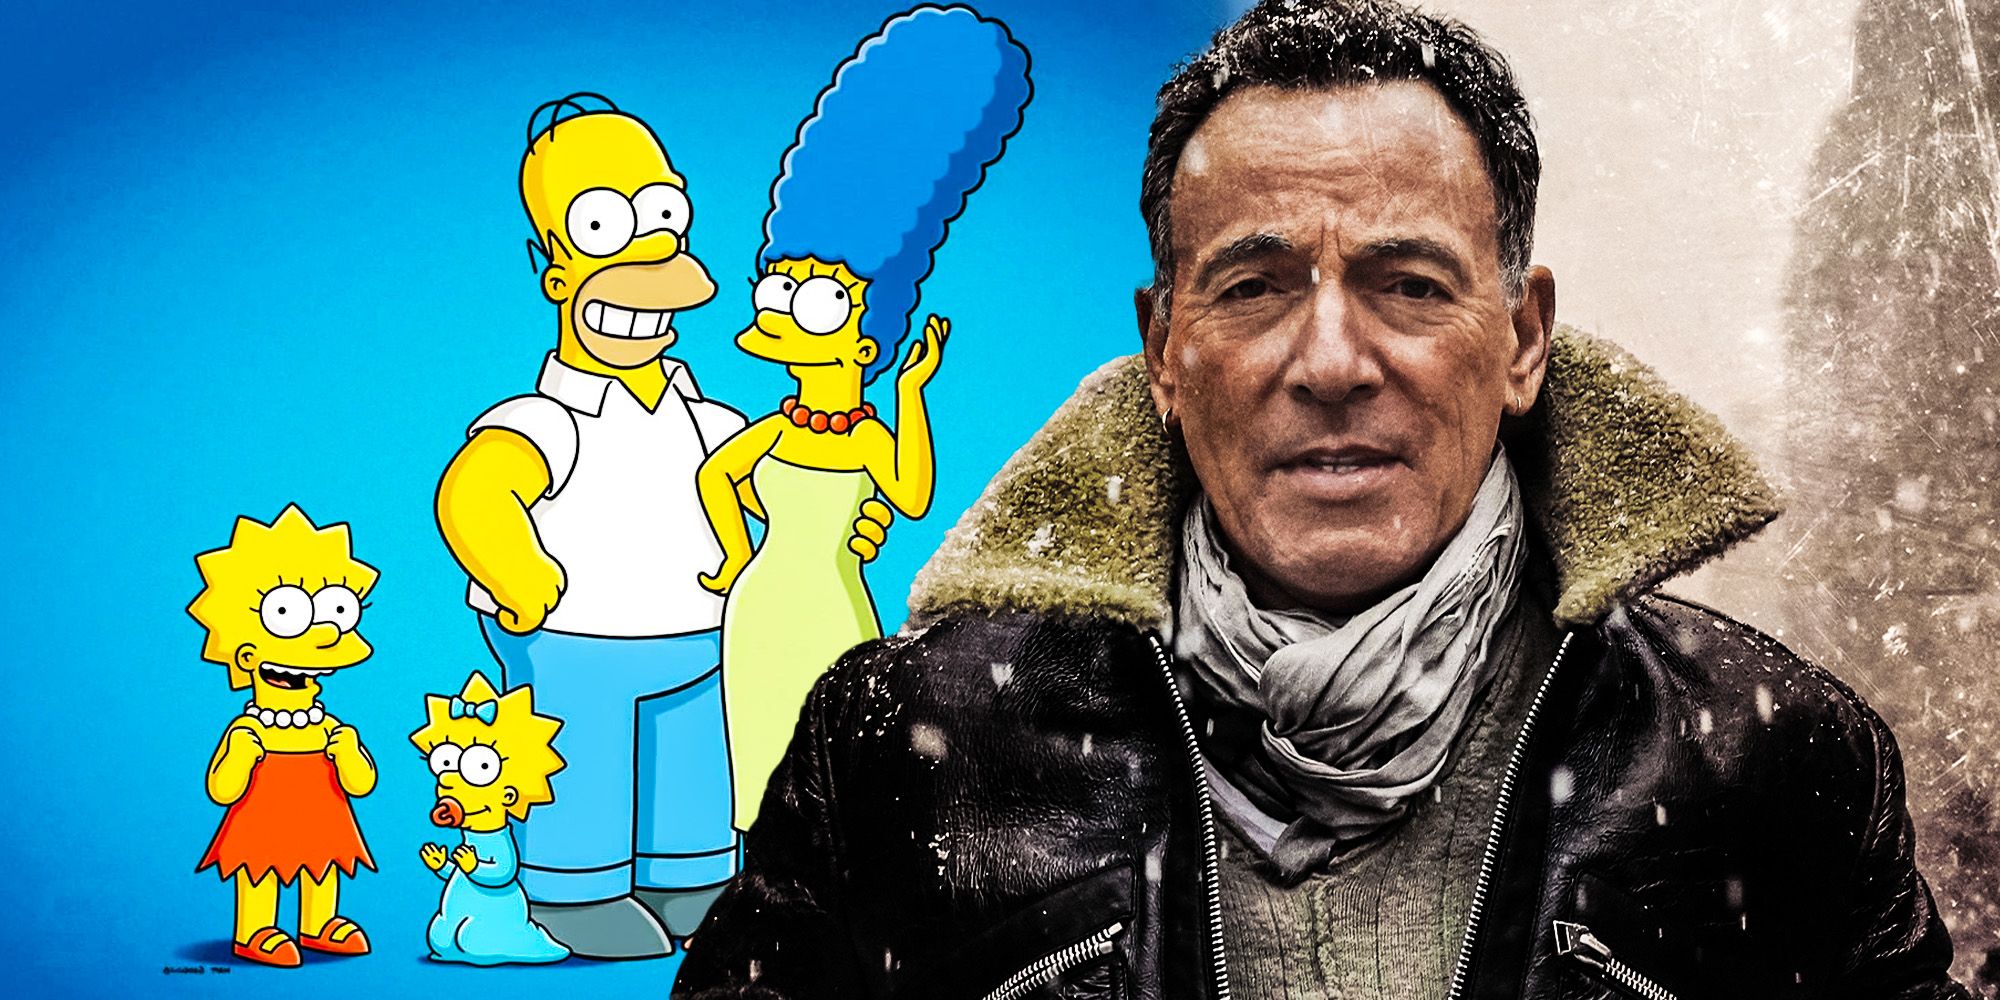 Bruce springsteen the simpsons